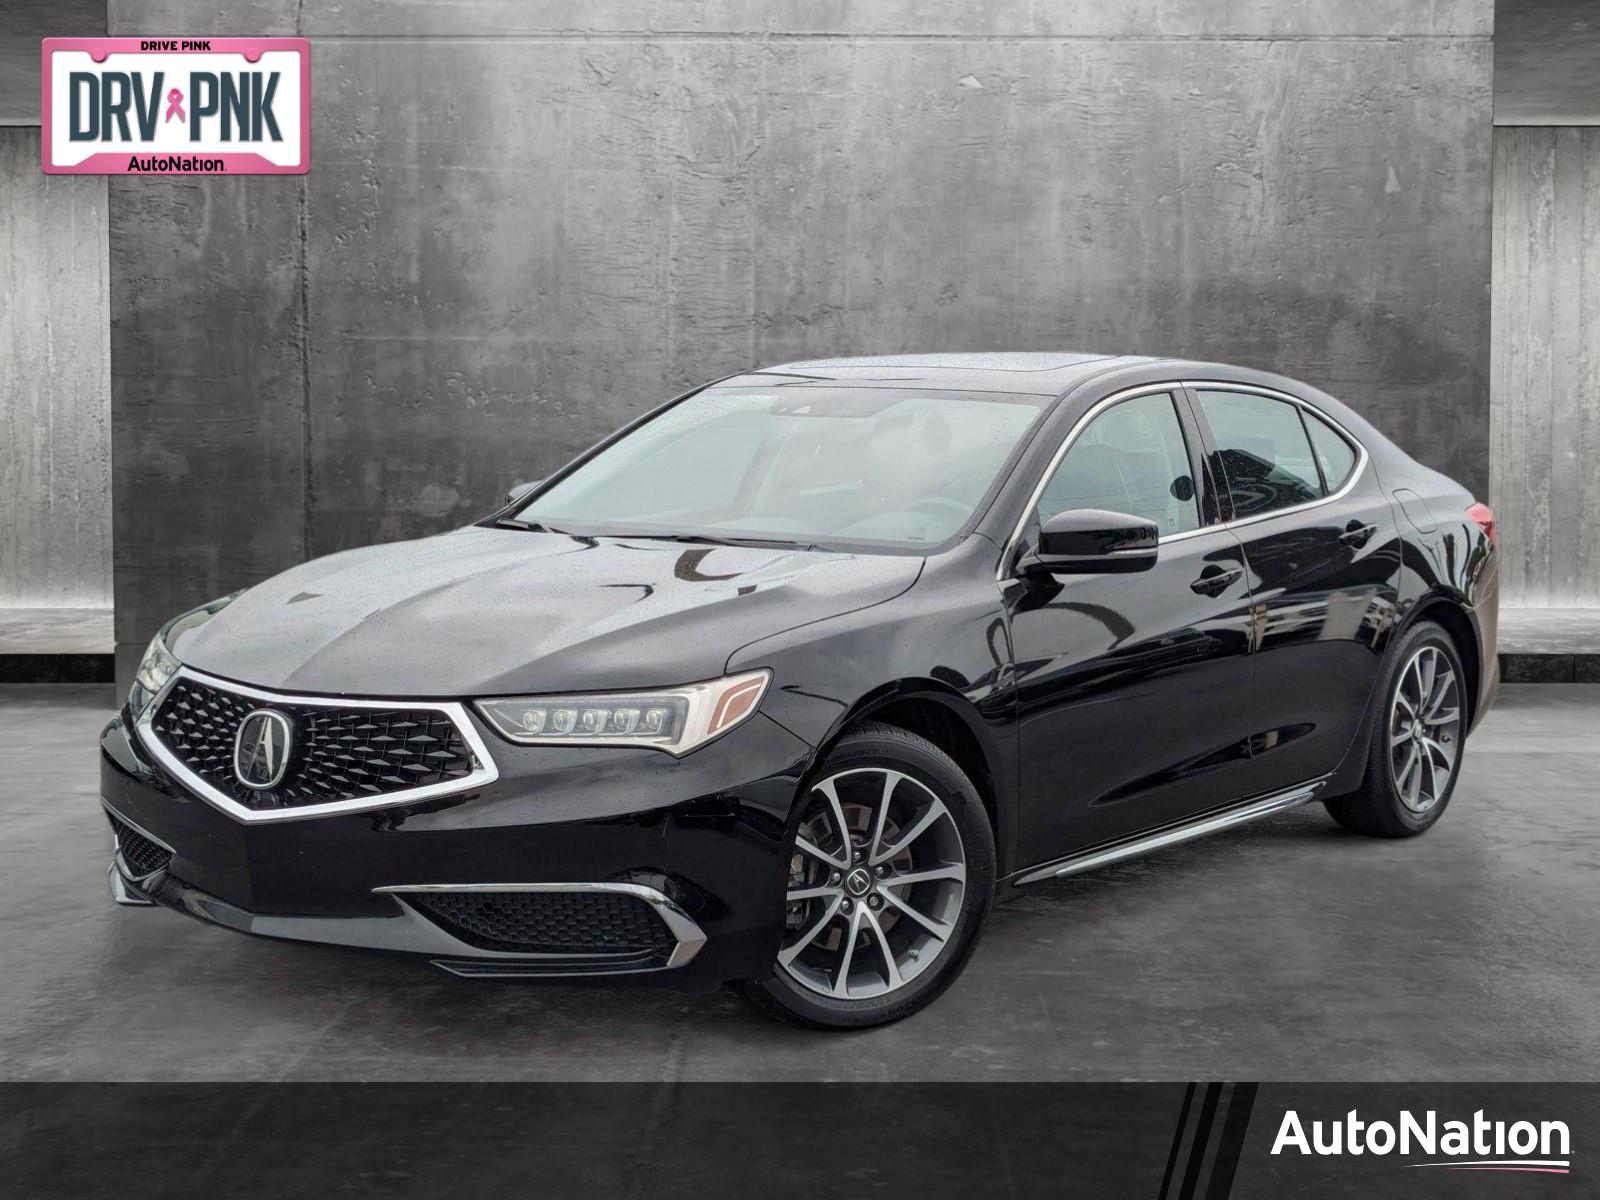 2018 Acura TLX Vehicle Photo in Clearwater, FL 33761